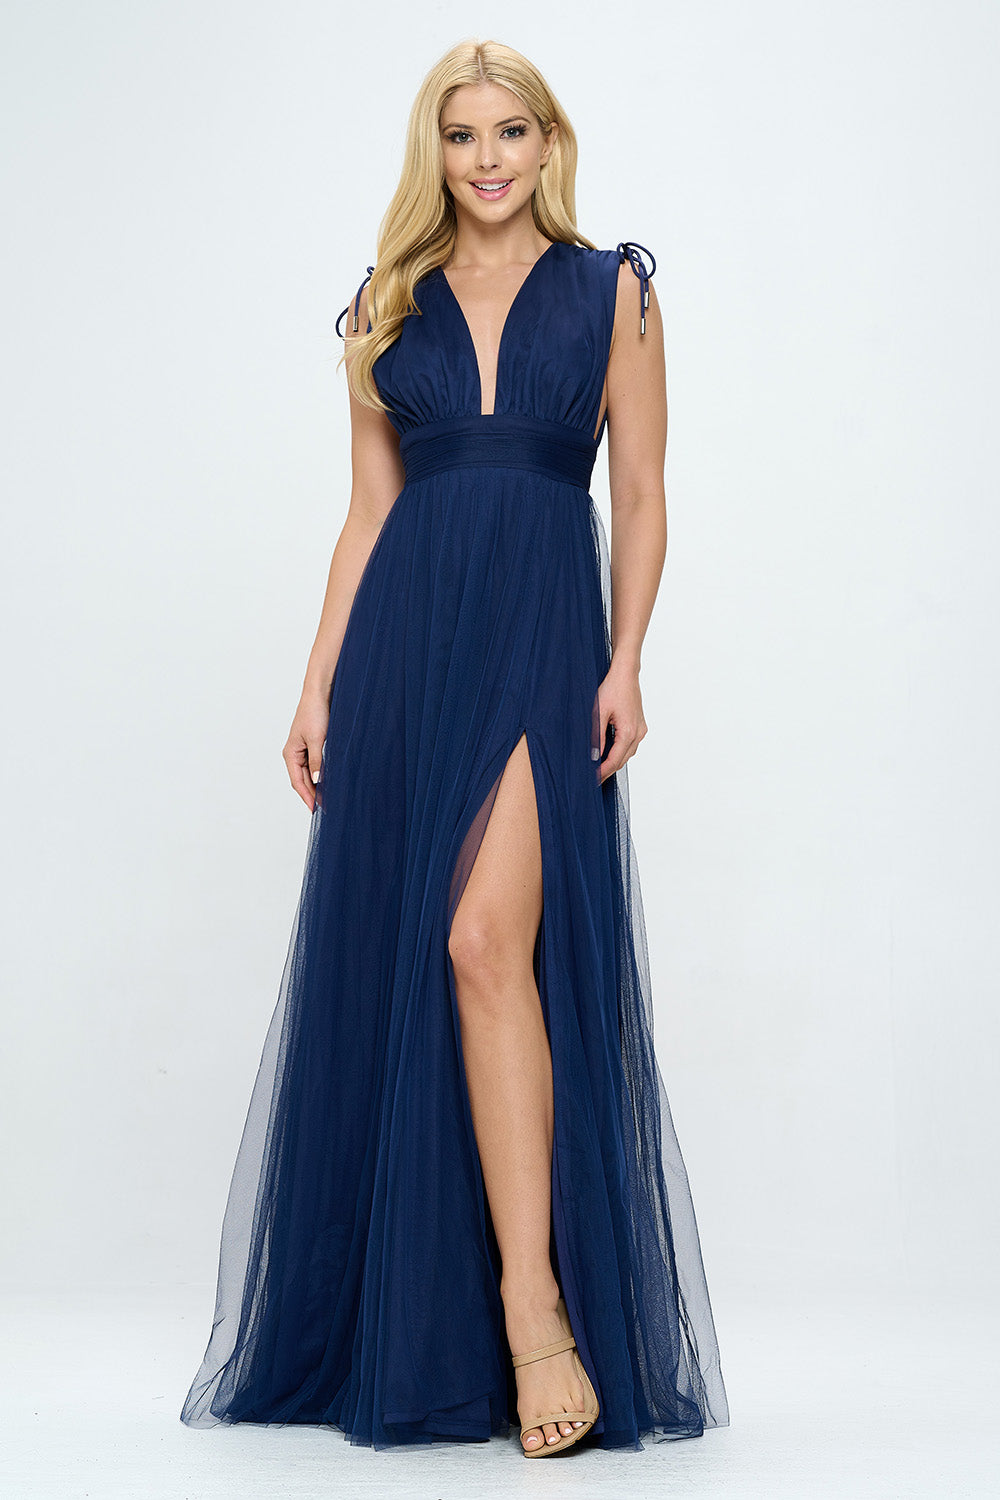 PLUNGING NECKLINE LAYERED TULLE MAXI DRESS